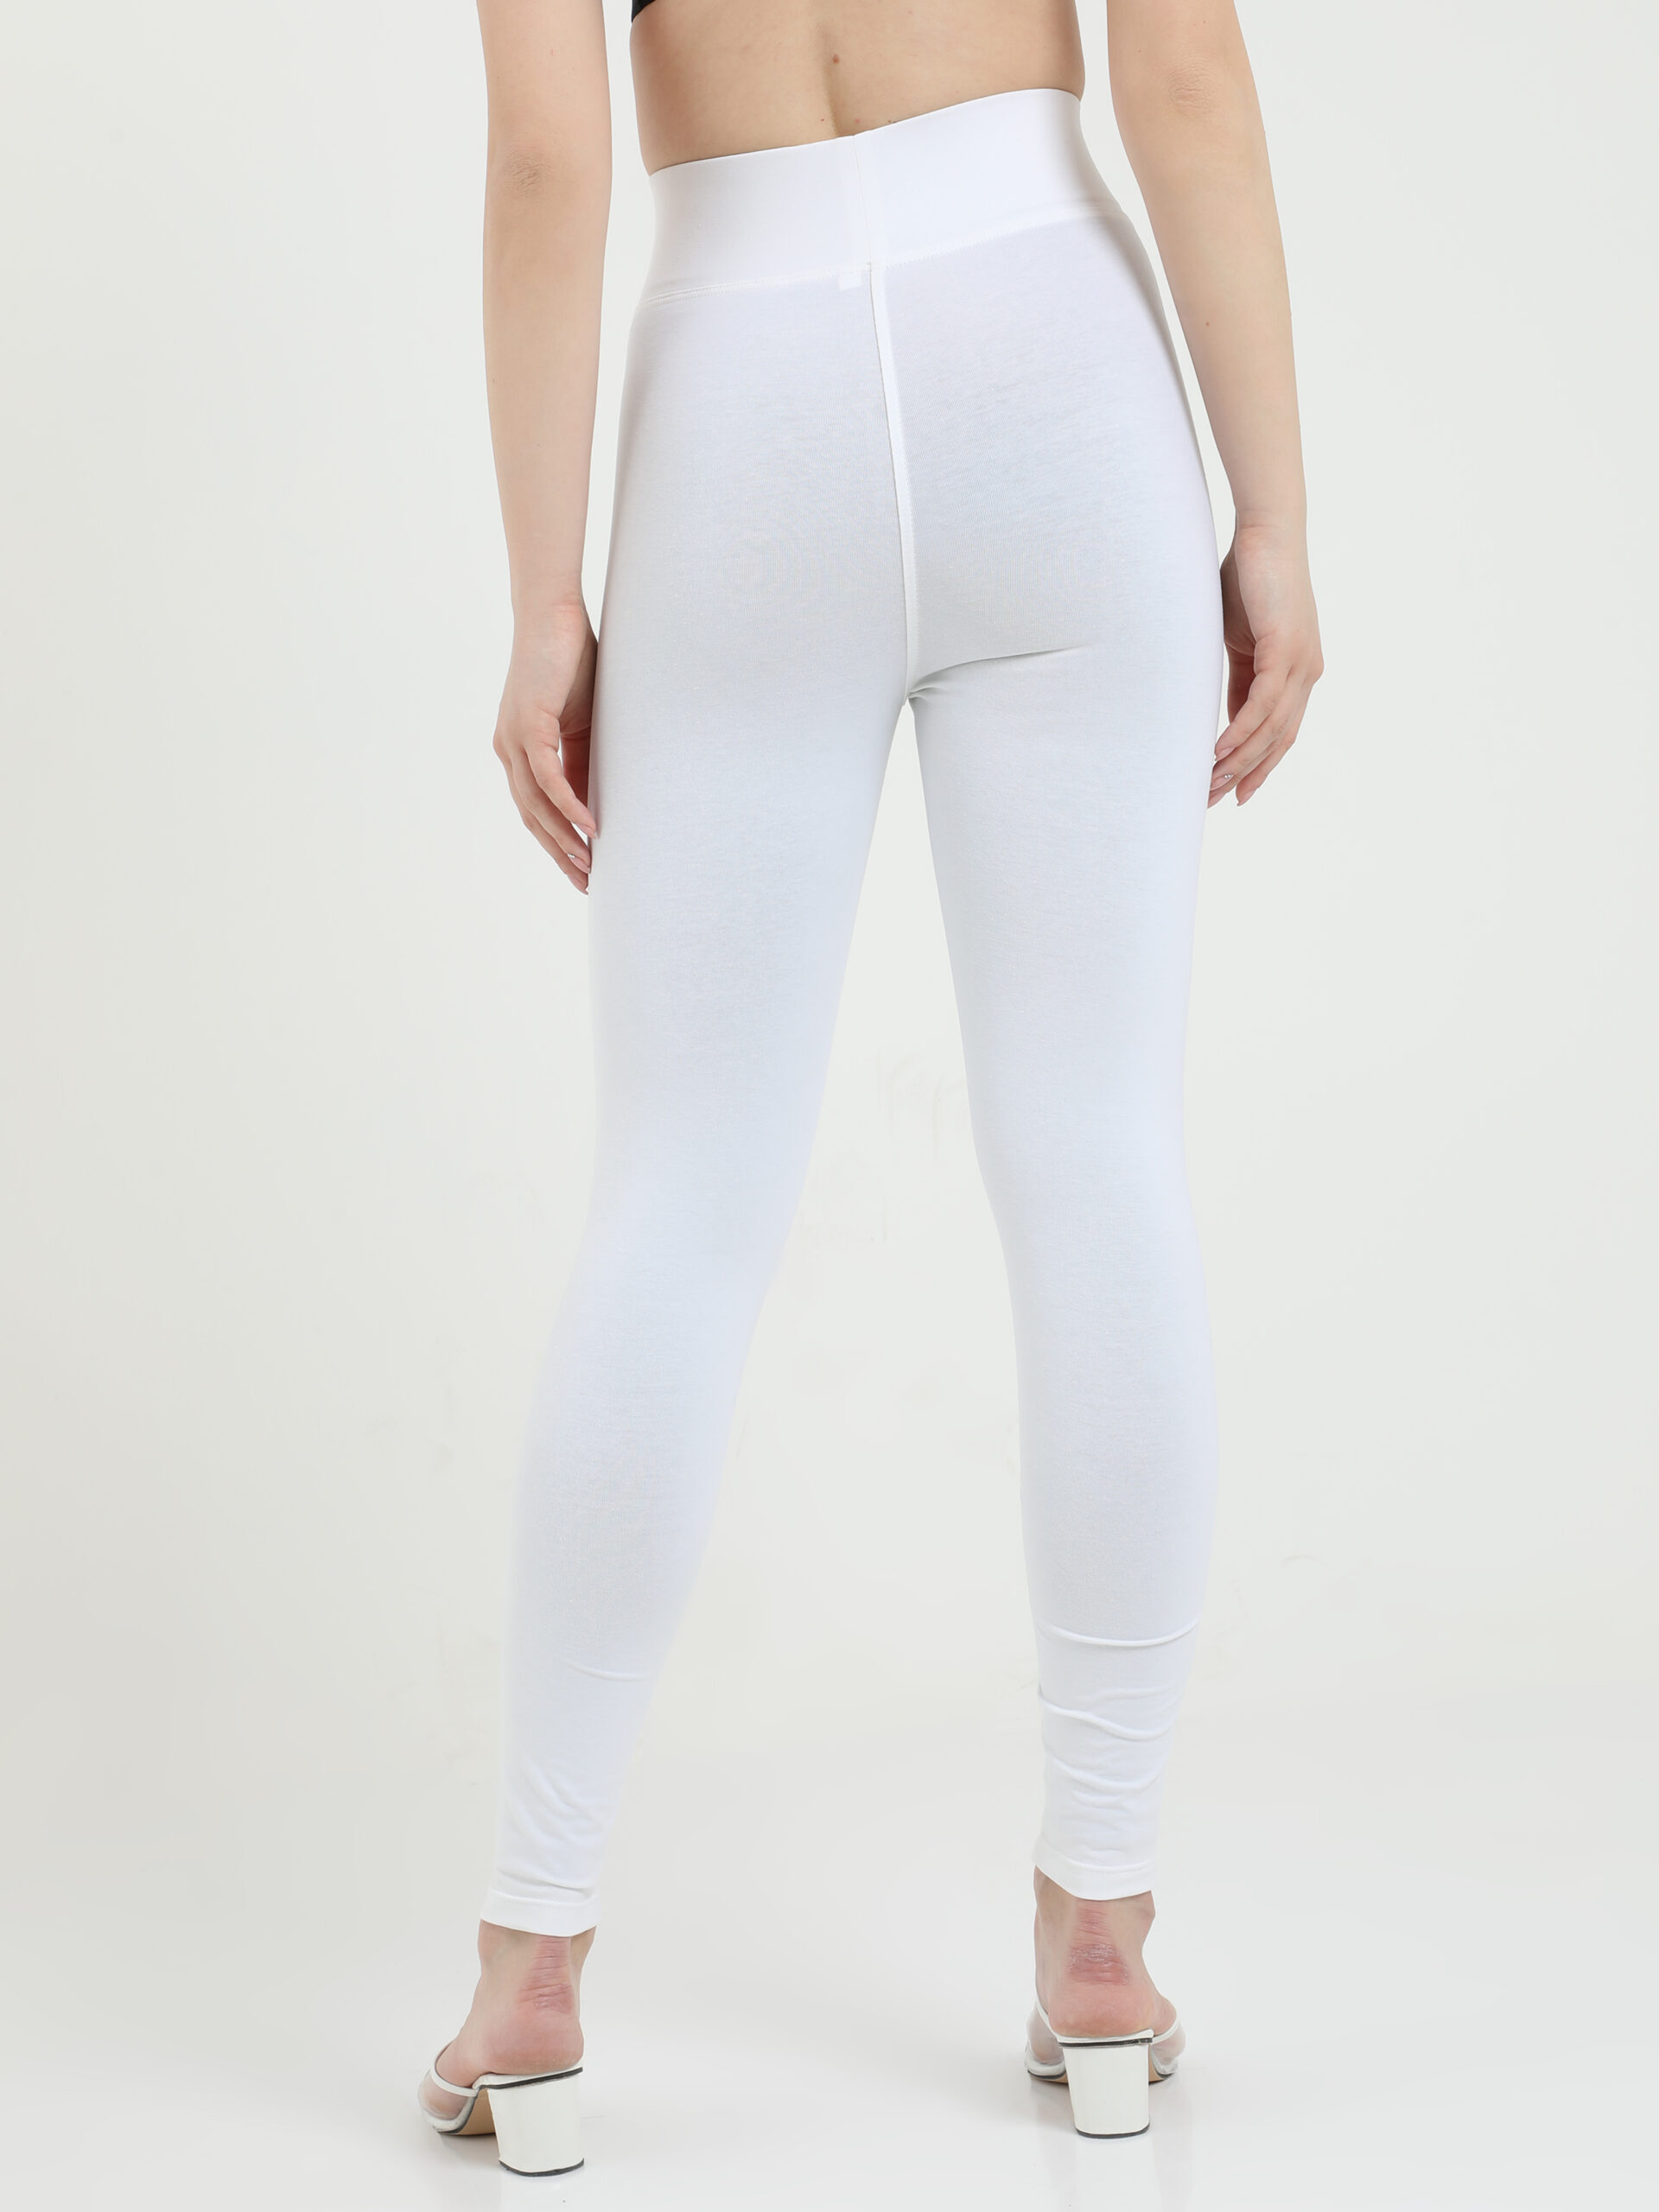 White High Waist Cotton Slim Fit Legging, Casual Wear at Rs 220 in Tiruppur